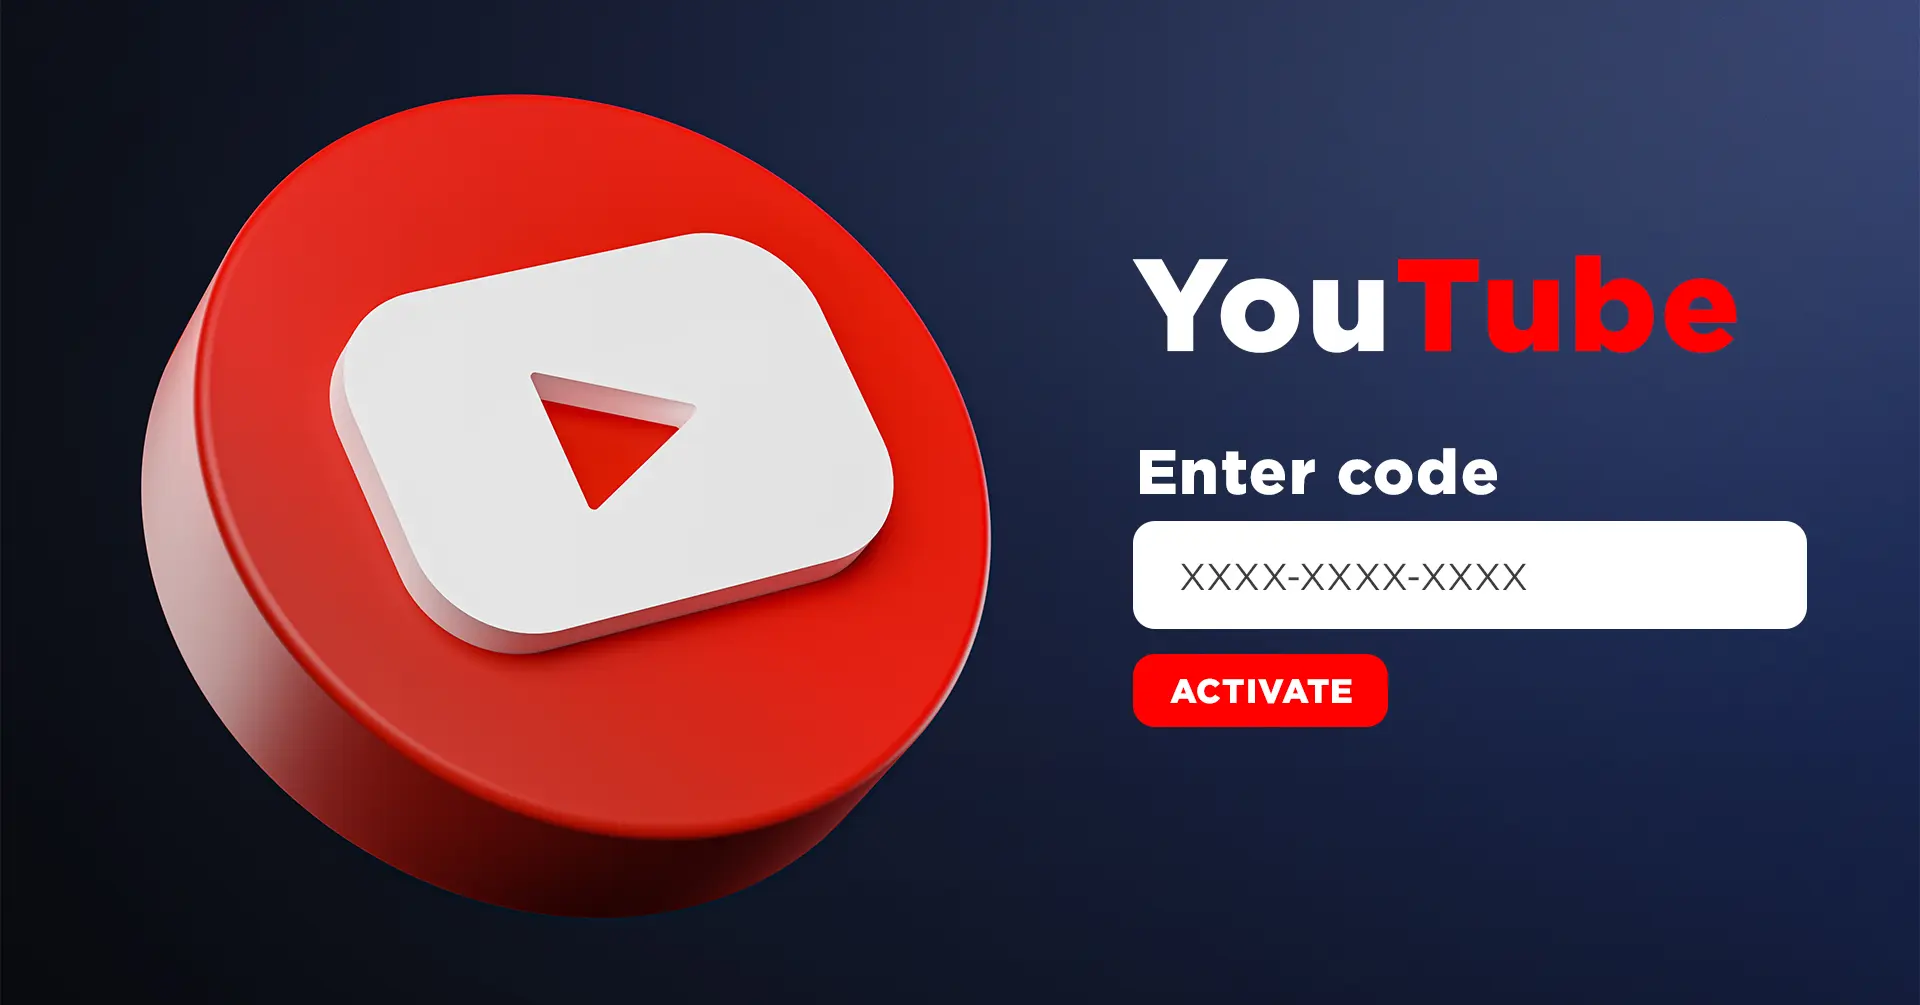 Youtube.com Login: Access Your Account on the Go!